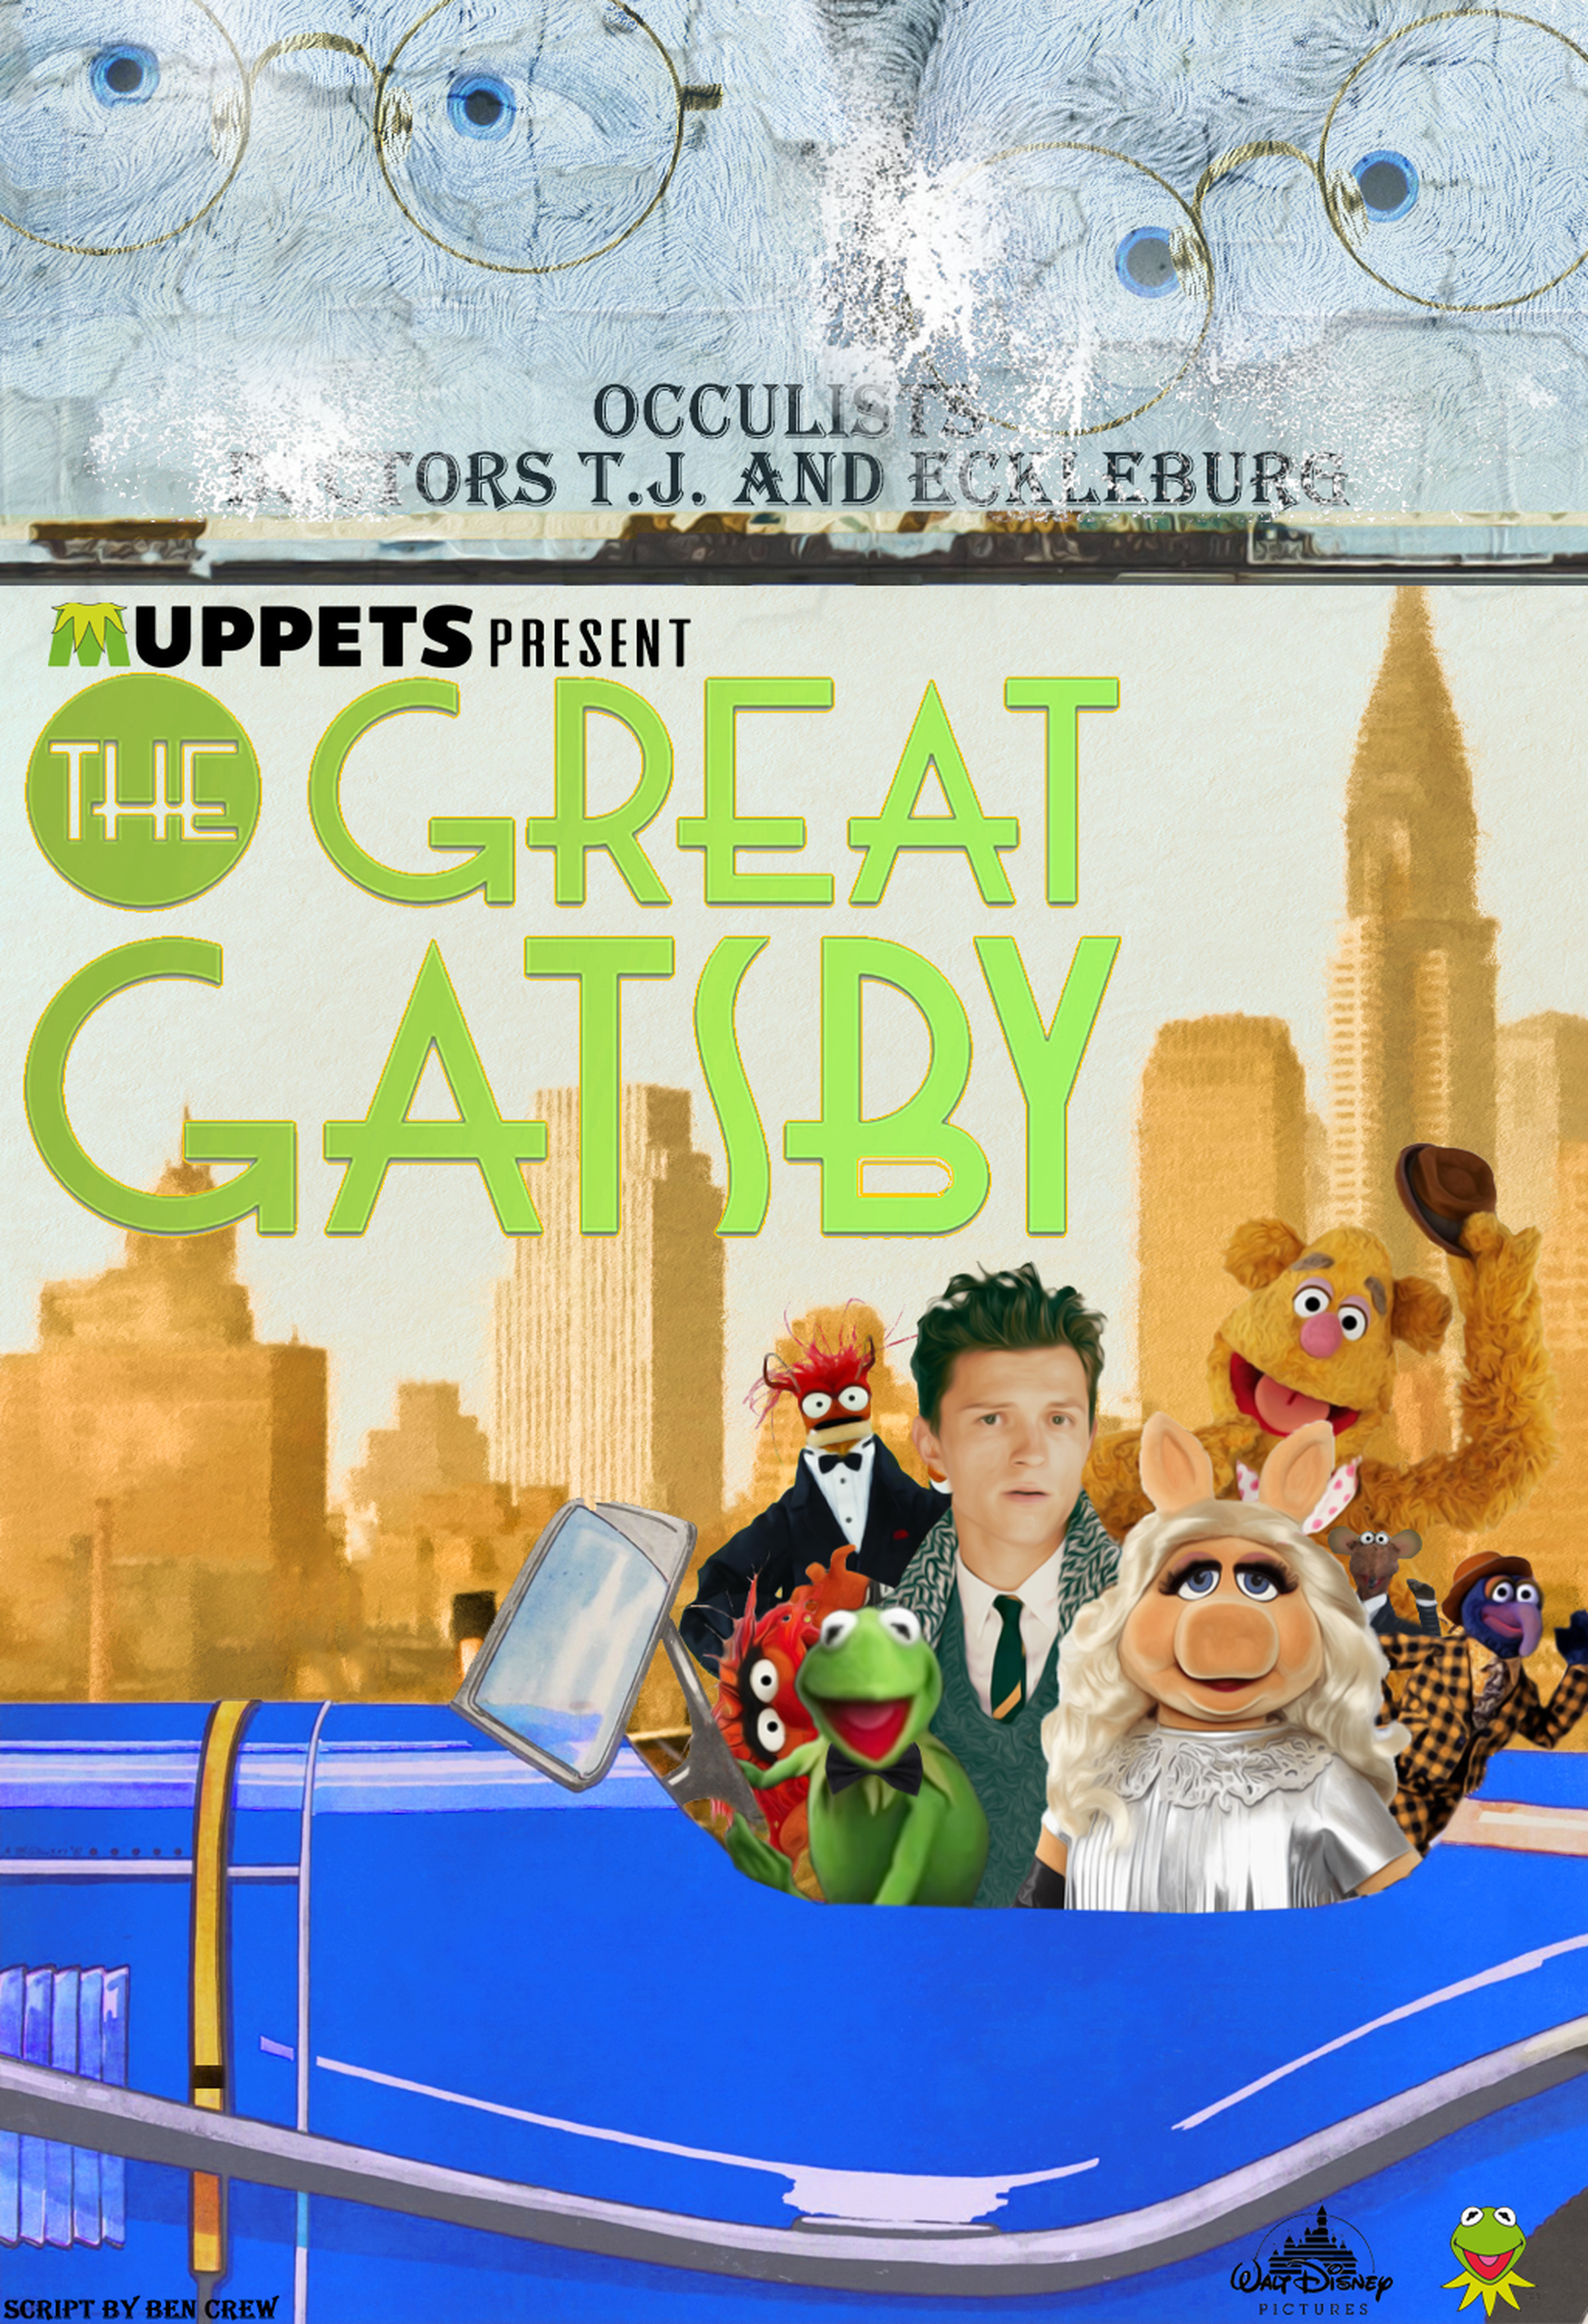 A mockup of the Muppet adaptations poster.